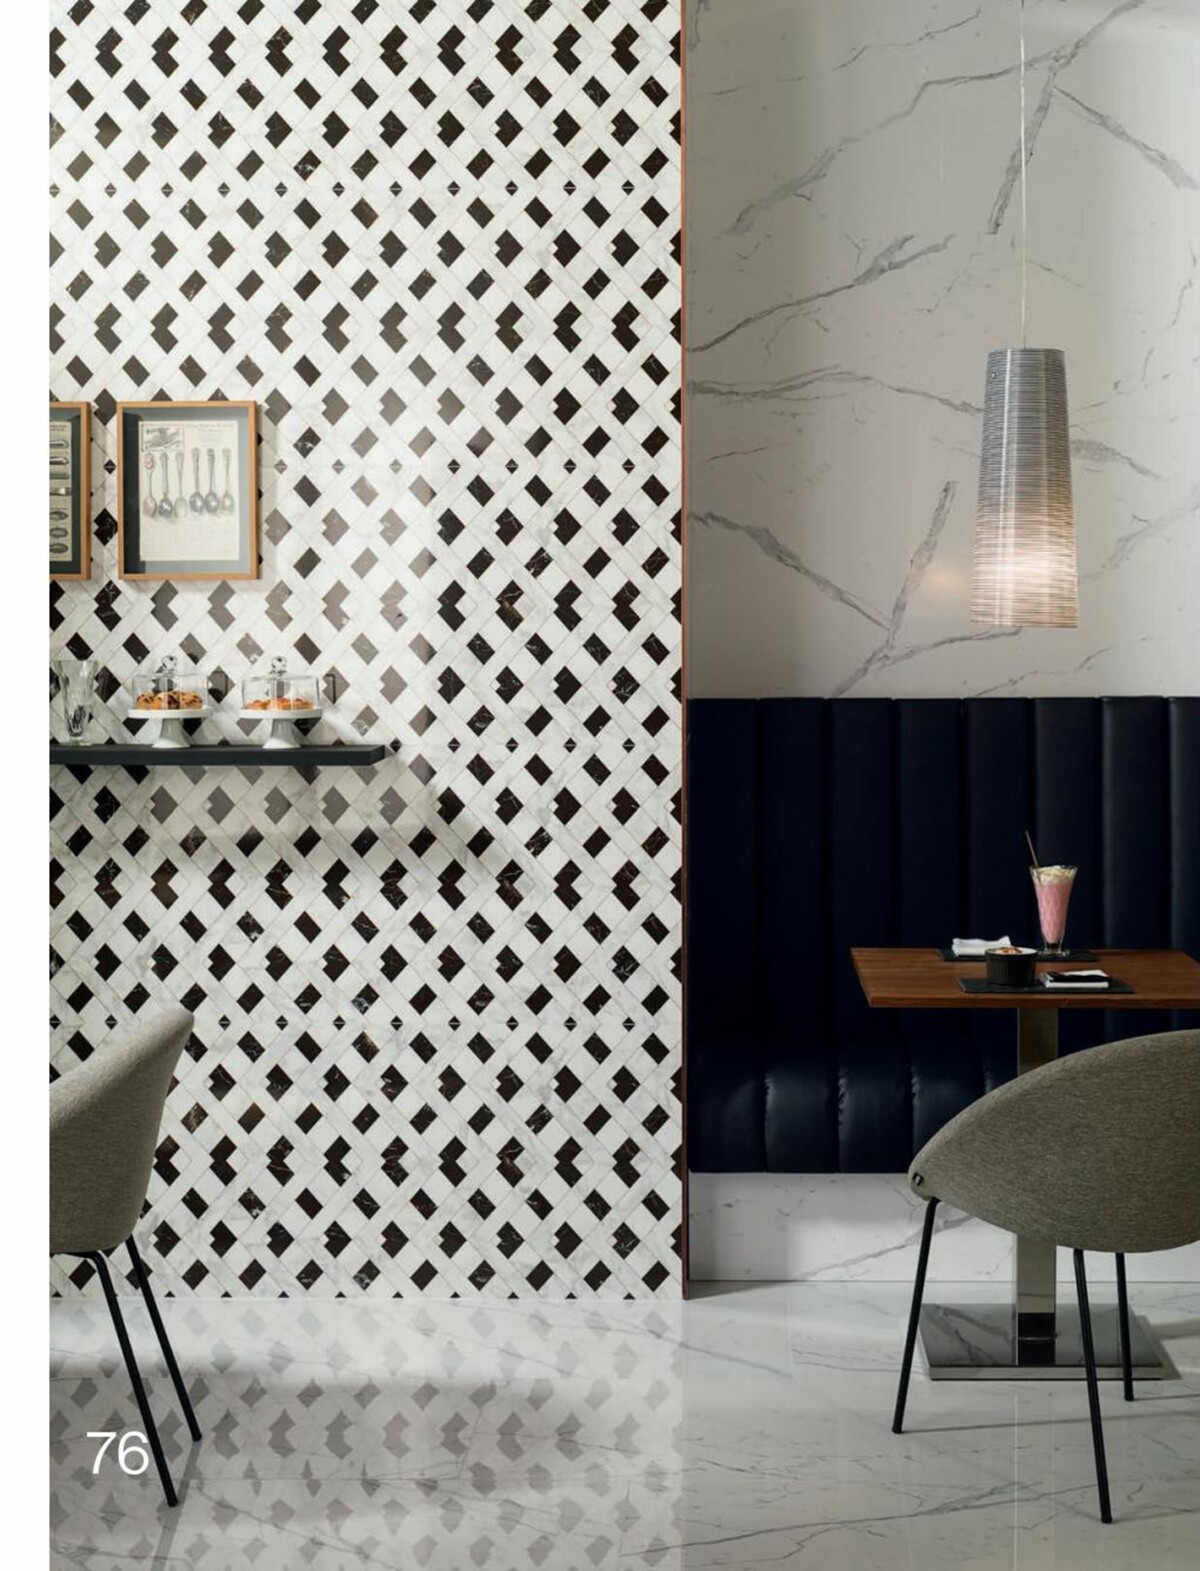 Catalogue MARMI,a ceramic tile that echoes the purity of marble, page 00076